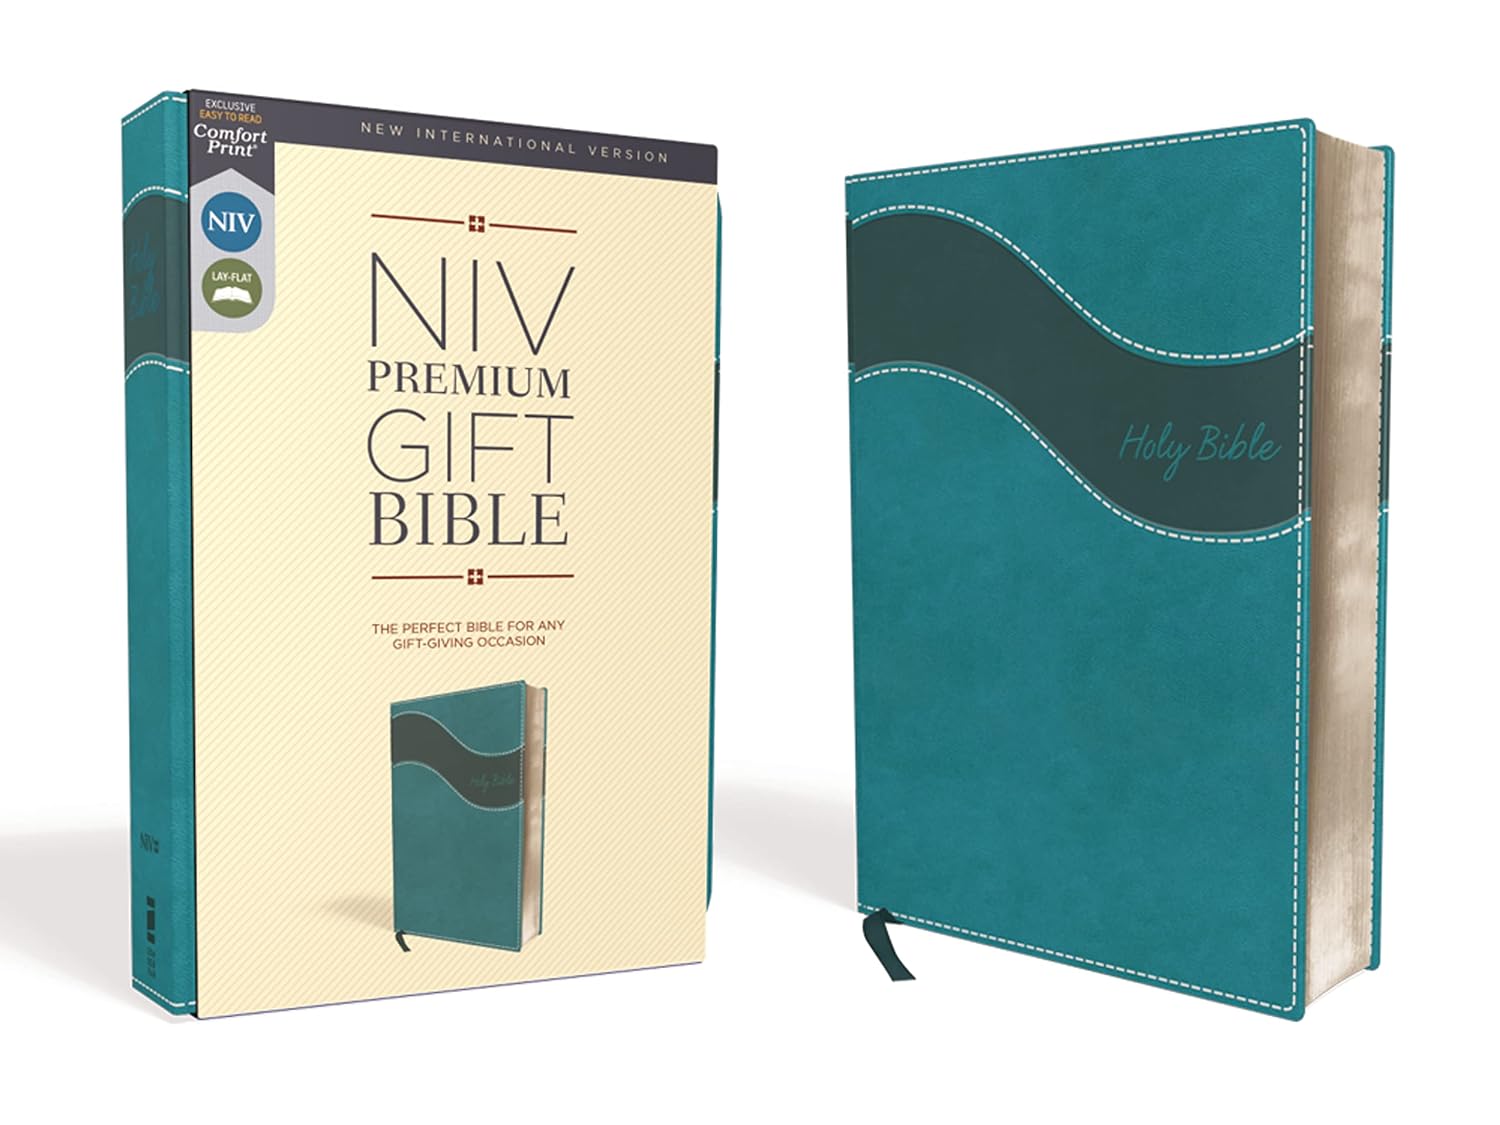 NIV Premium Gift Bible, Leathersoft, Teal, Red Letter, Comfort Print